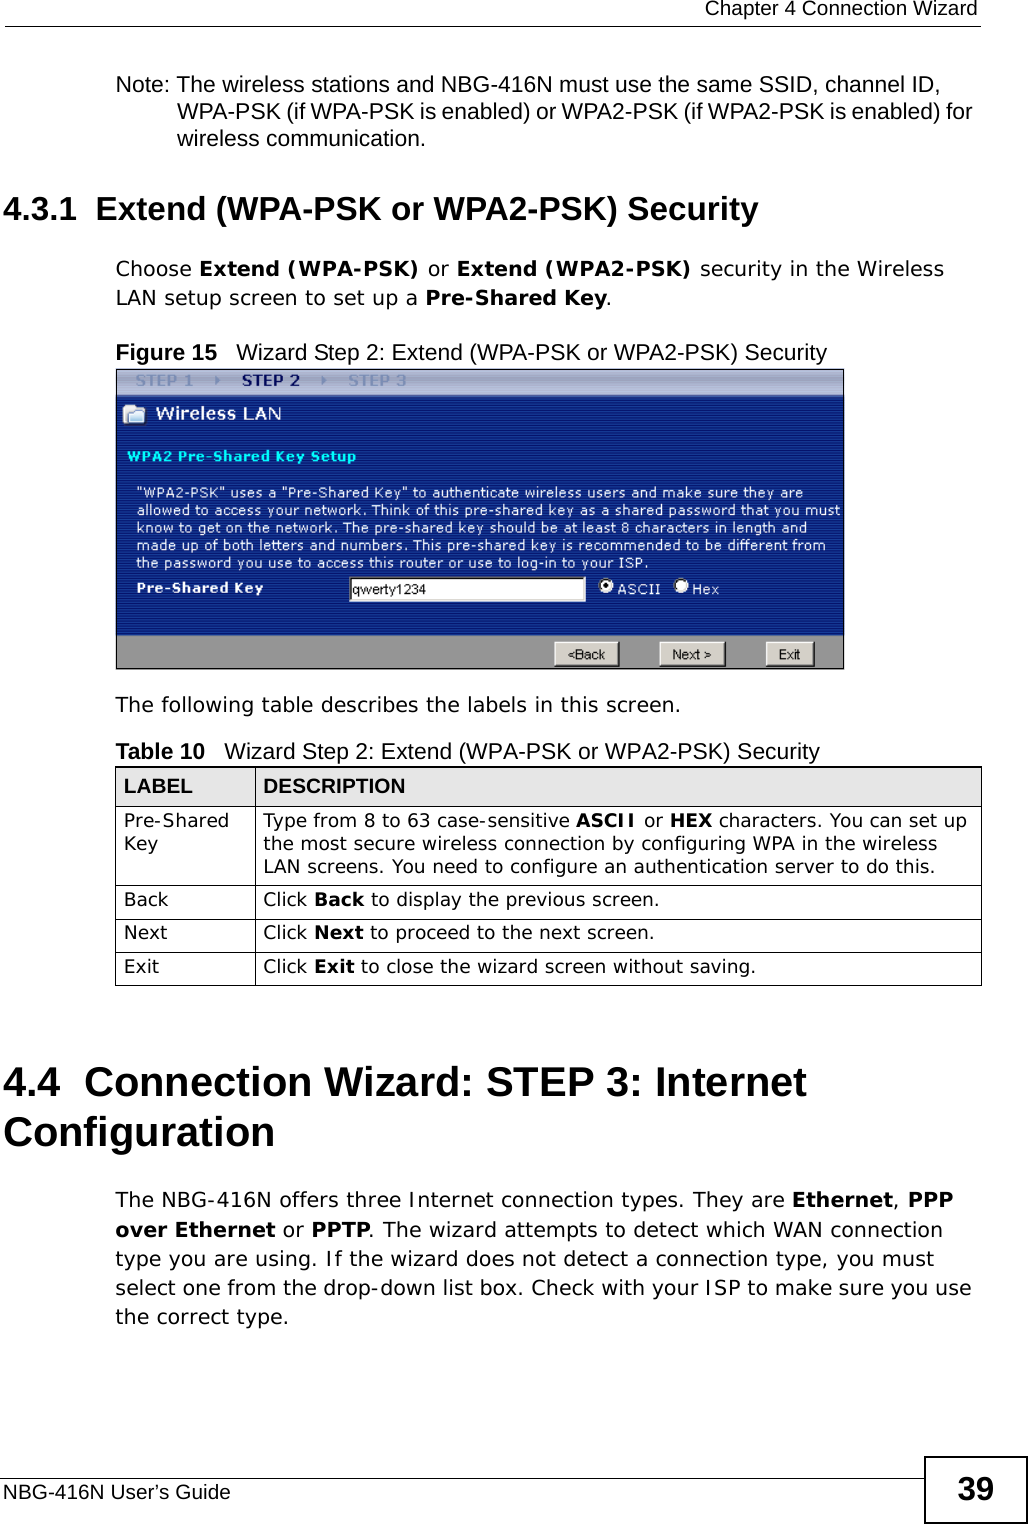  Chapter 4 Connection WizardNBG-416N User’s Guide 39Note: The wireless stations and NBG-416N must use the same SSID, channel ID, WPA-PSK (if WPA-PSK is enabled) or WPA2-PSK (if WPA2-PSK is enabled) for wireless communication.4.3.1  Extend (WPA-PSK or WPA2-PSK) SecurityChoose Extend (WPA-PSK) or Extend (WPA2-PSK) security in the Wireless LAN setup screen to set up a Pre-Shared Key.Figure 15   Wizard Step 2: Extend (WPA-PSK or WPA2-PSK) SecurityThe following table describes the labels in this screen. 4.4  Connection Wizard: STEP 3: Internet ConfigurationThe NBG-416N offers three Internet connection types. They are Ethernet, PPP over Ethernet or PPTP. The wizard attempts to detect which WAN connection type you are using. If the wizard does not detect a connection type, you must select one from the drop-down list box. Check with your ISP to make sure you use the correct type.Table 10   Wizard Step 2: Extend (WPA-PSK or WPA2-PSK) SecurityLABEL DESCRIPTIONPre-Shared Key Type from 8 to 63 case-sensitive ASCII or HEX characters. You can set up the most secure wireless connection by configuring WPA in the wireless LAN screens. You need to configure an authentication server to do this.Back Click Back to display the previous screen.Next Click Next to proceed to the next screen. Exit Click Exit to close the wizard screen without saving.